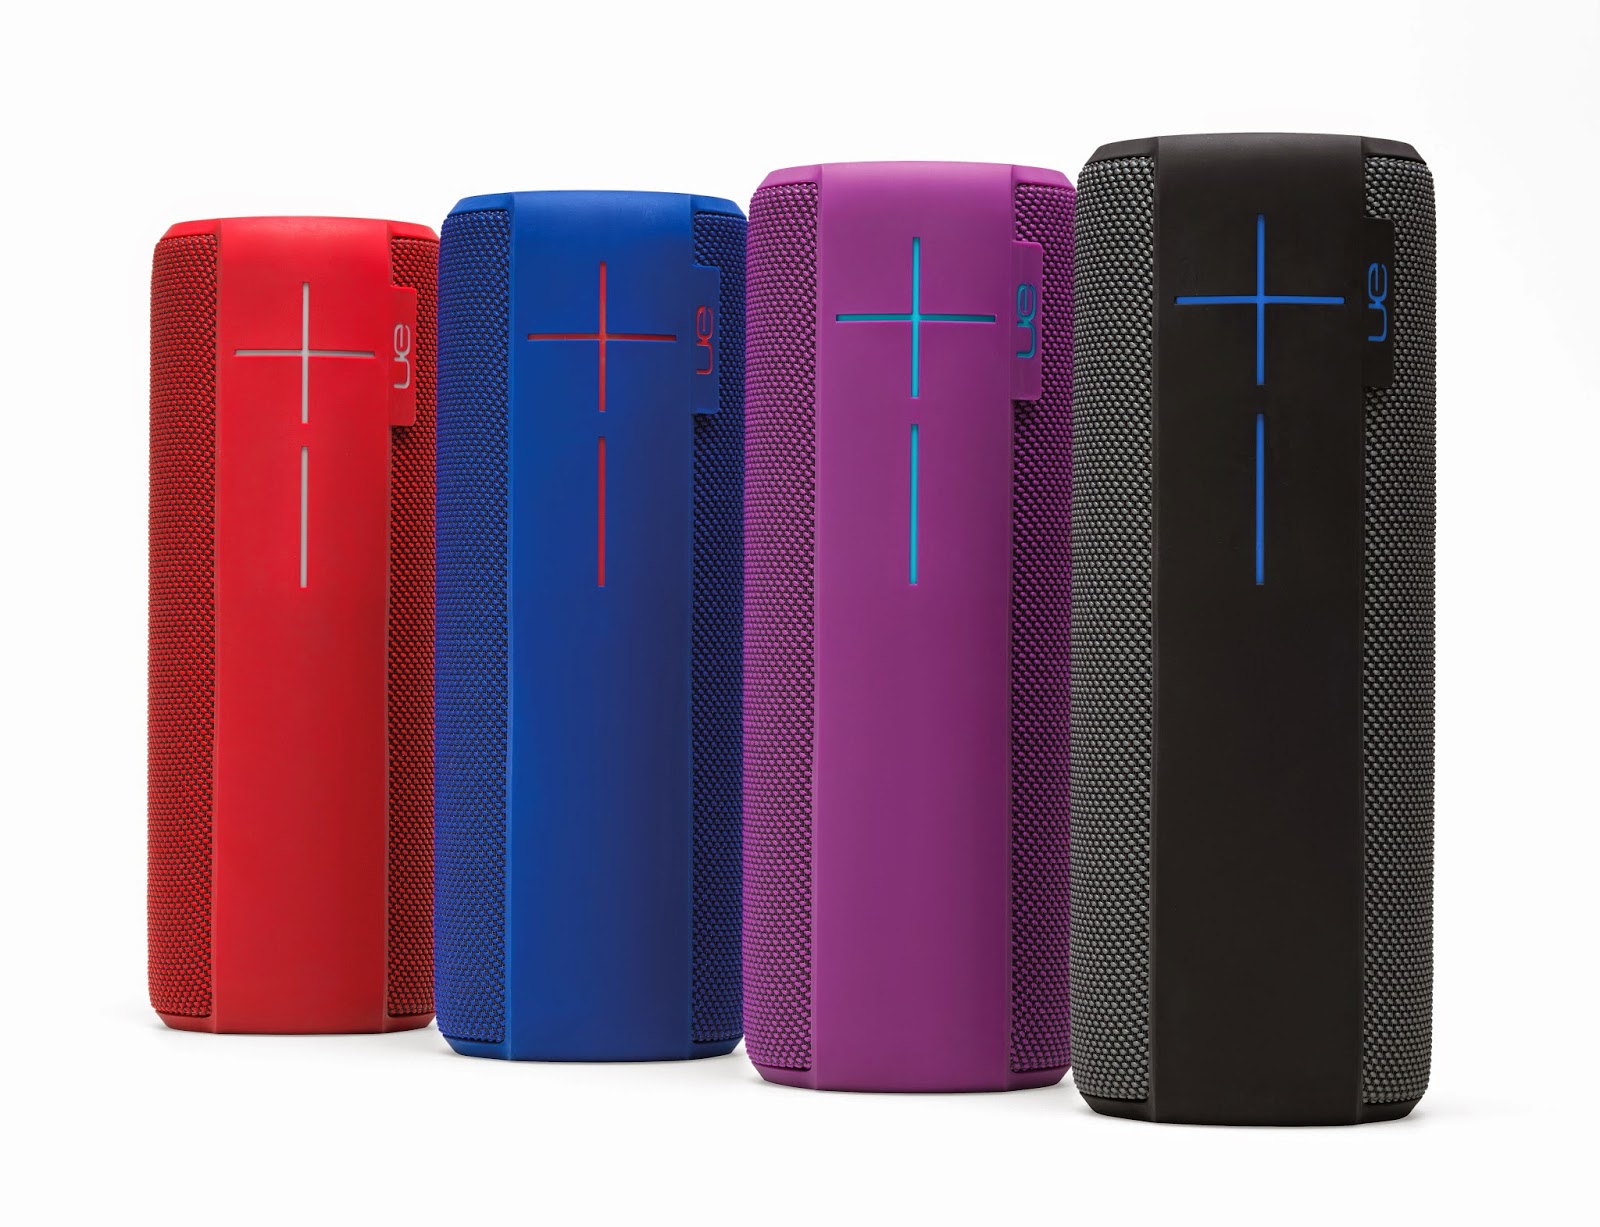 Ultimate Ears Megaboom speaker comes in different colours